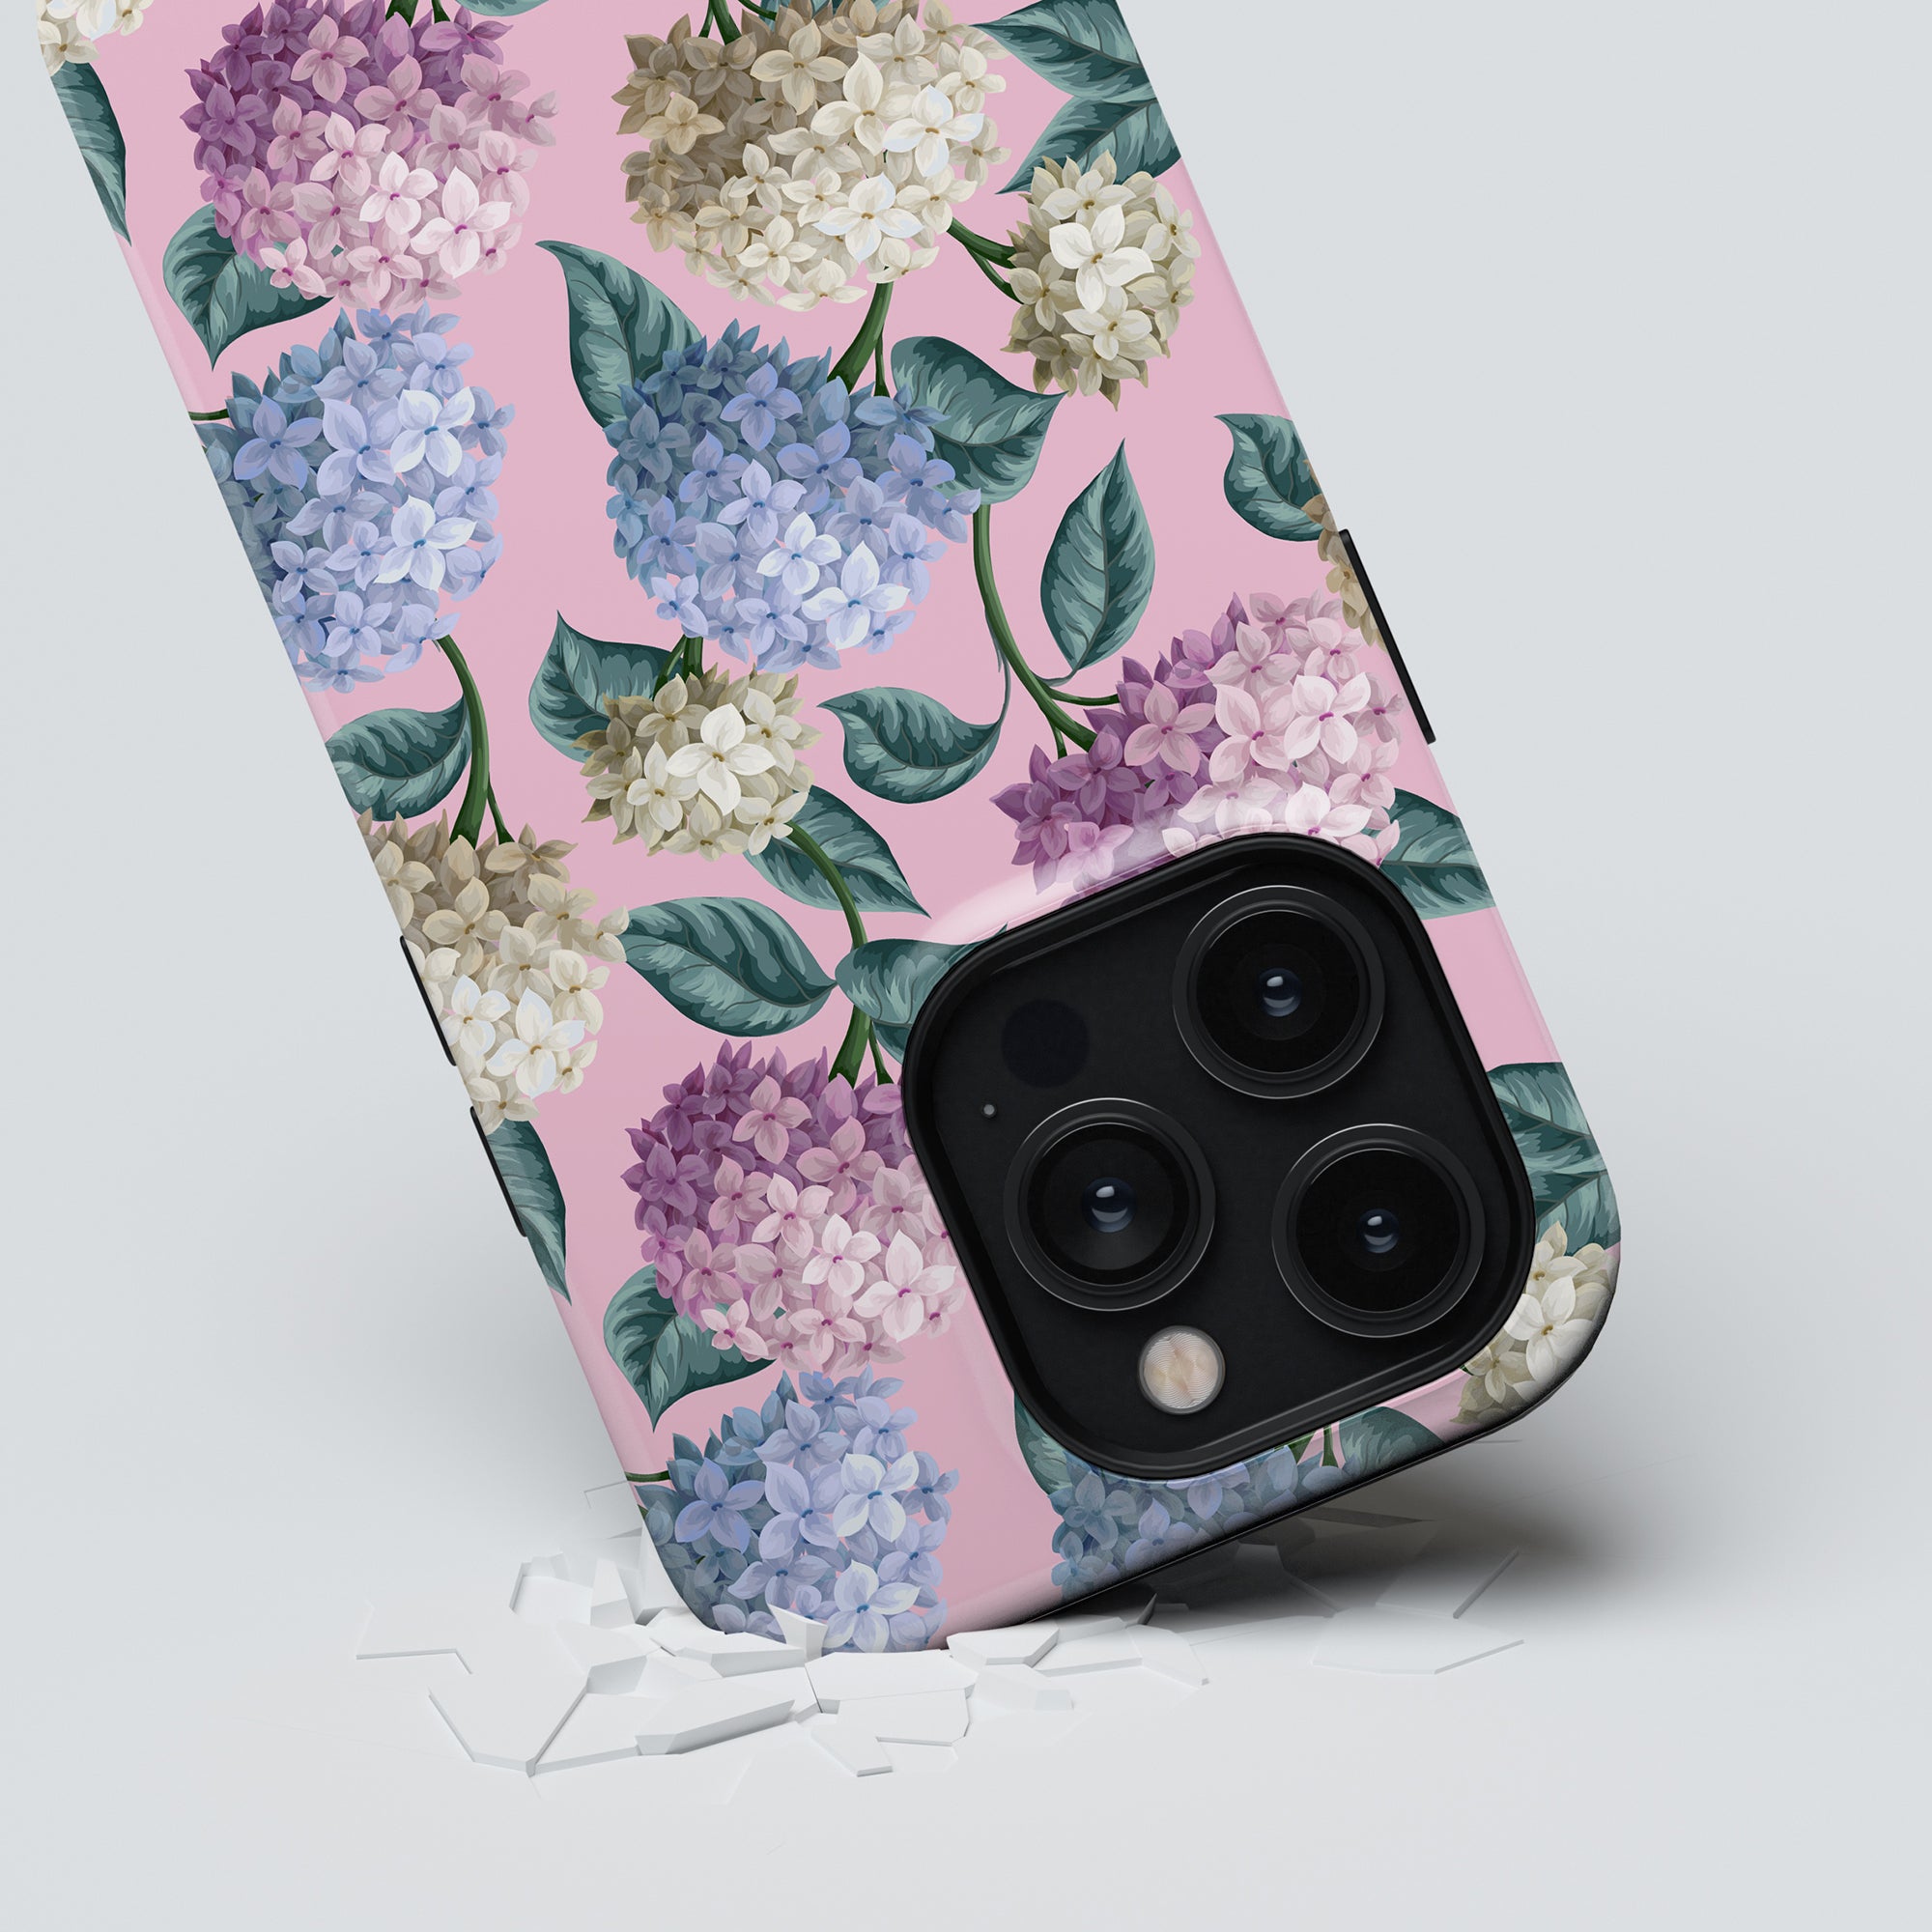 A smartphone with a Hydrangea - Tough Case from the Summer Collection is placed on a white surface. The phone's camera is prominently visible, showcasing three lenses. Small white fragments are scattered near the phone, highlighting its robust smartphone protection.